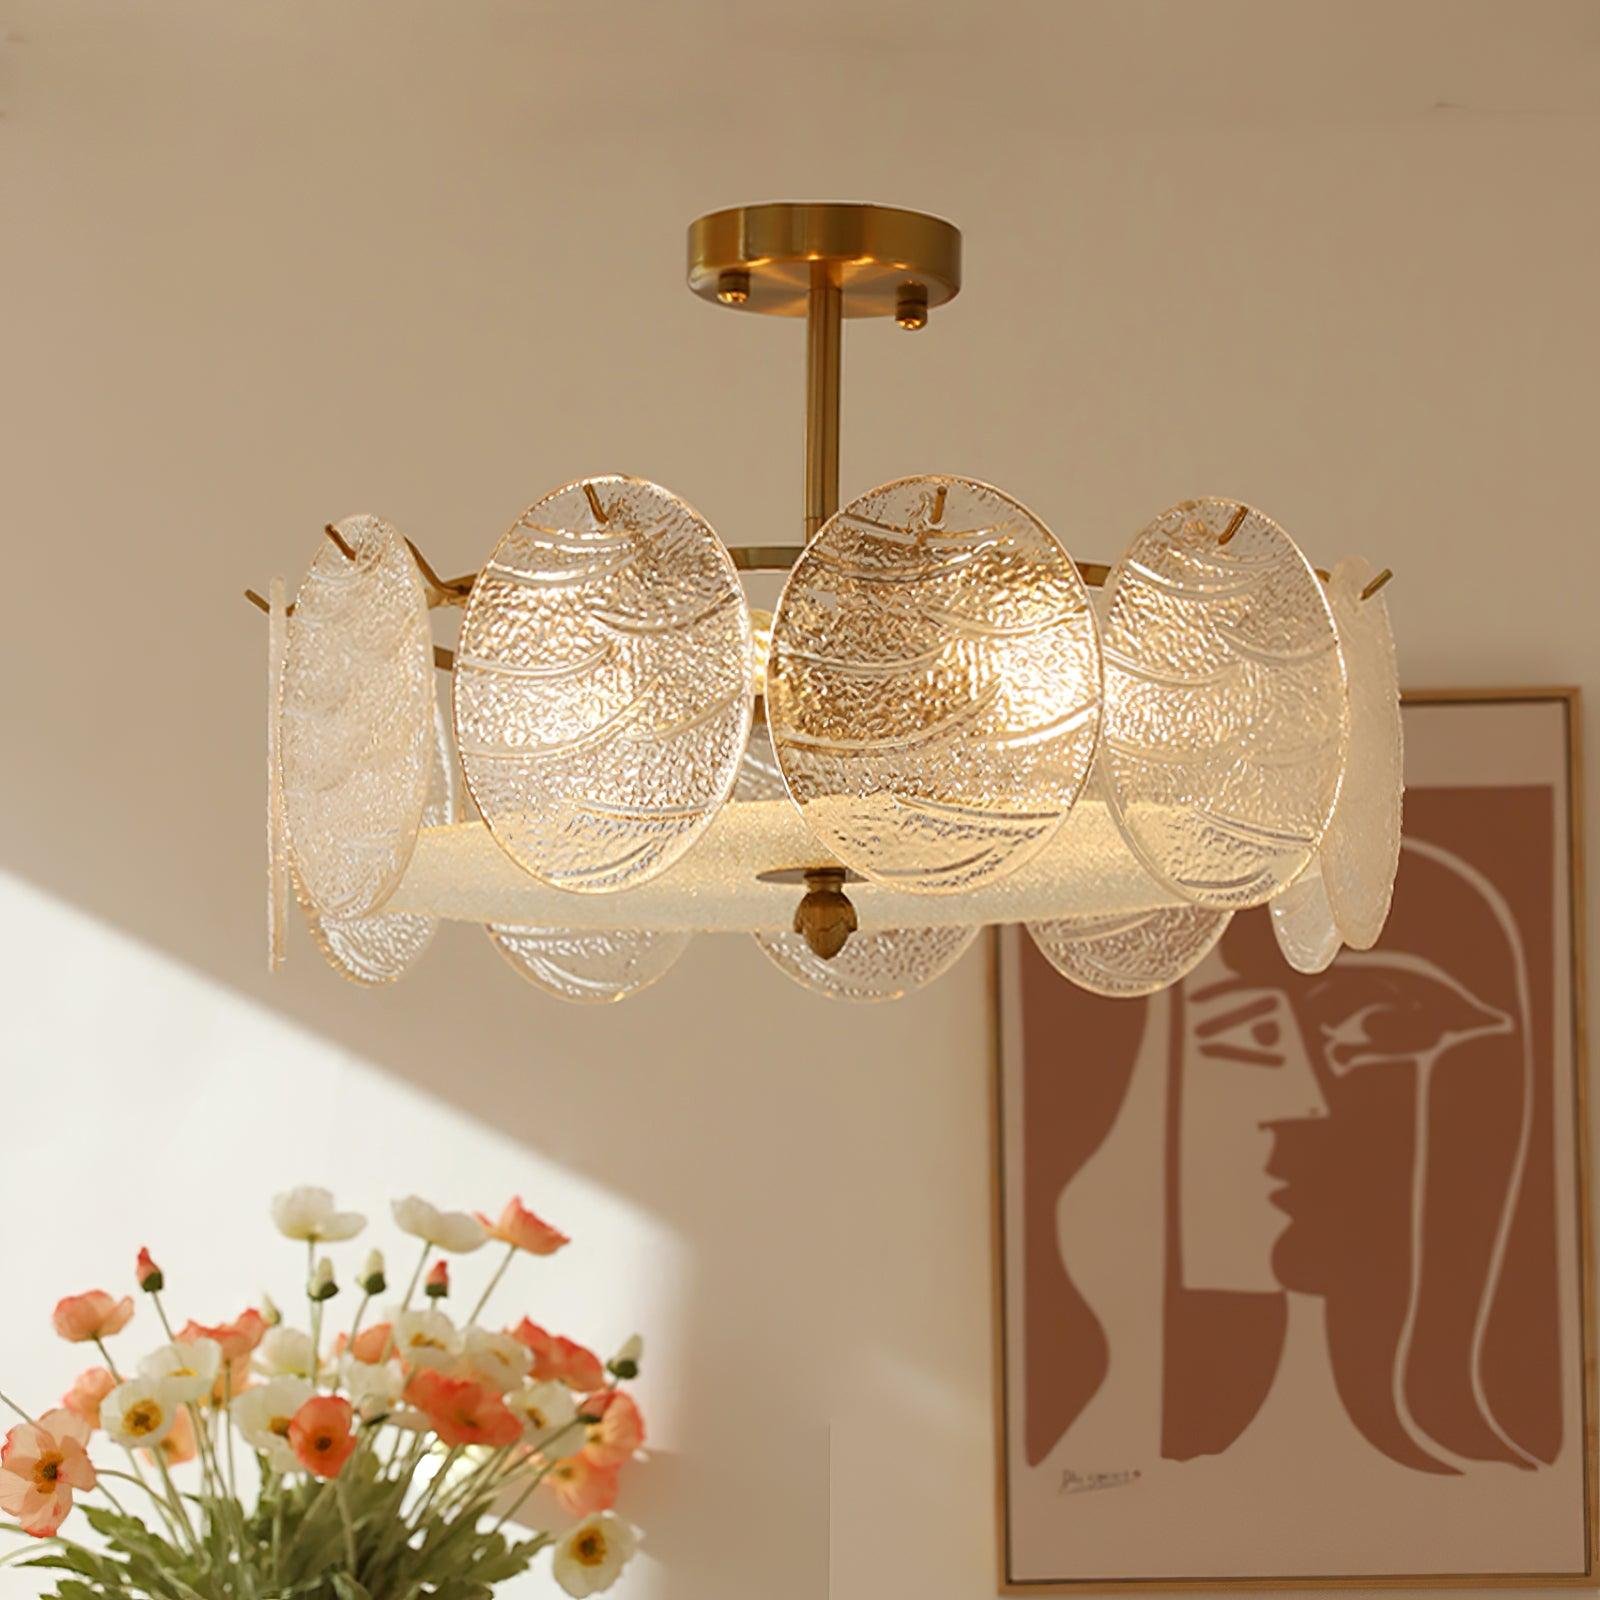 Sue-Anne Ceiling Lamp with 6 heads, measuring approximately 19.7 inches in diameter and 6.3 inches in height (50cm x 16cm), crafted in Copper+Clear.